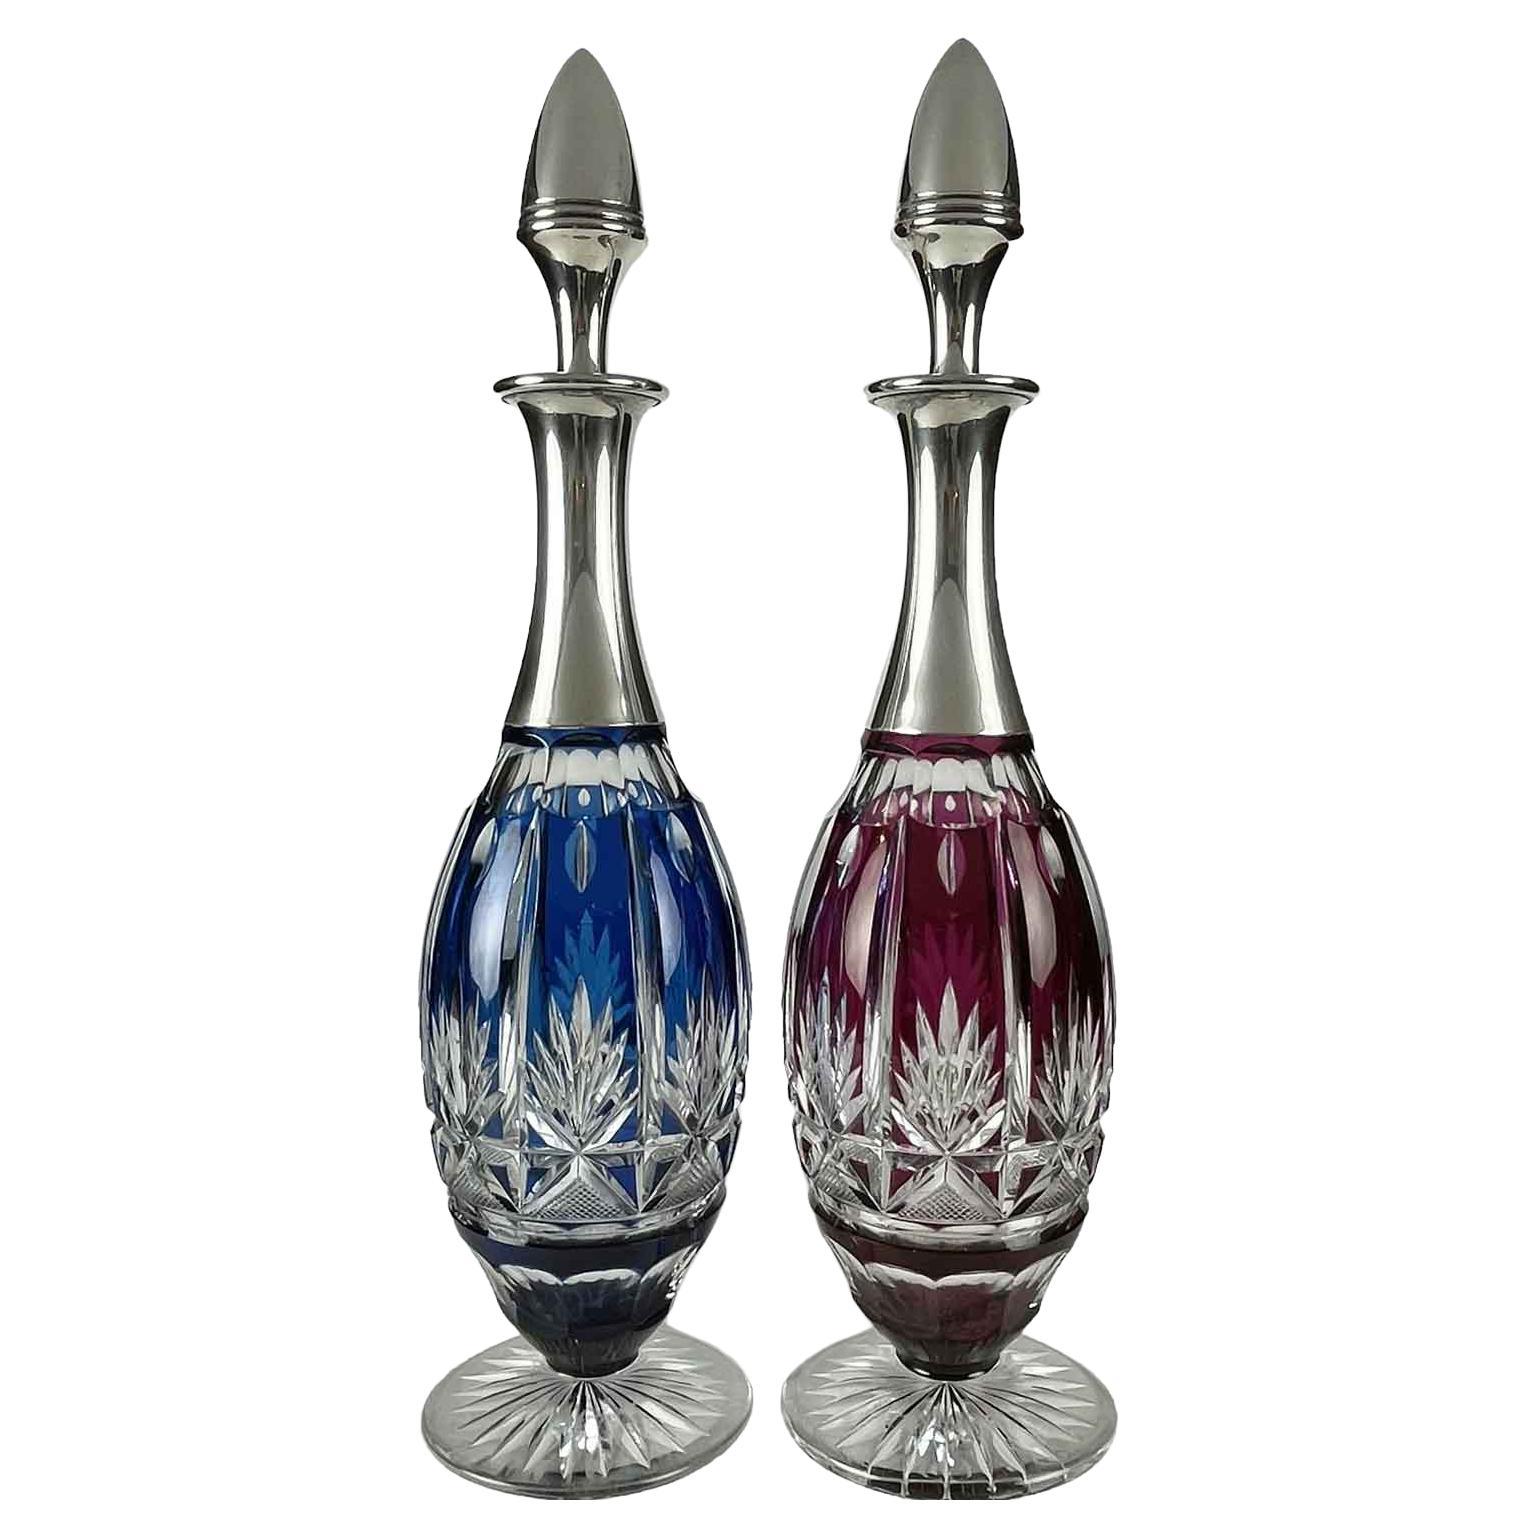 20th Century Pair of Bohemian Crystal Liquor Bottles with Silver Neck